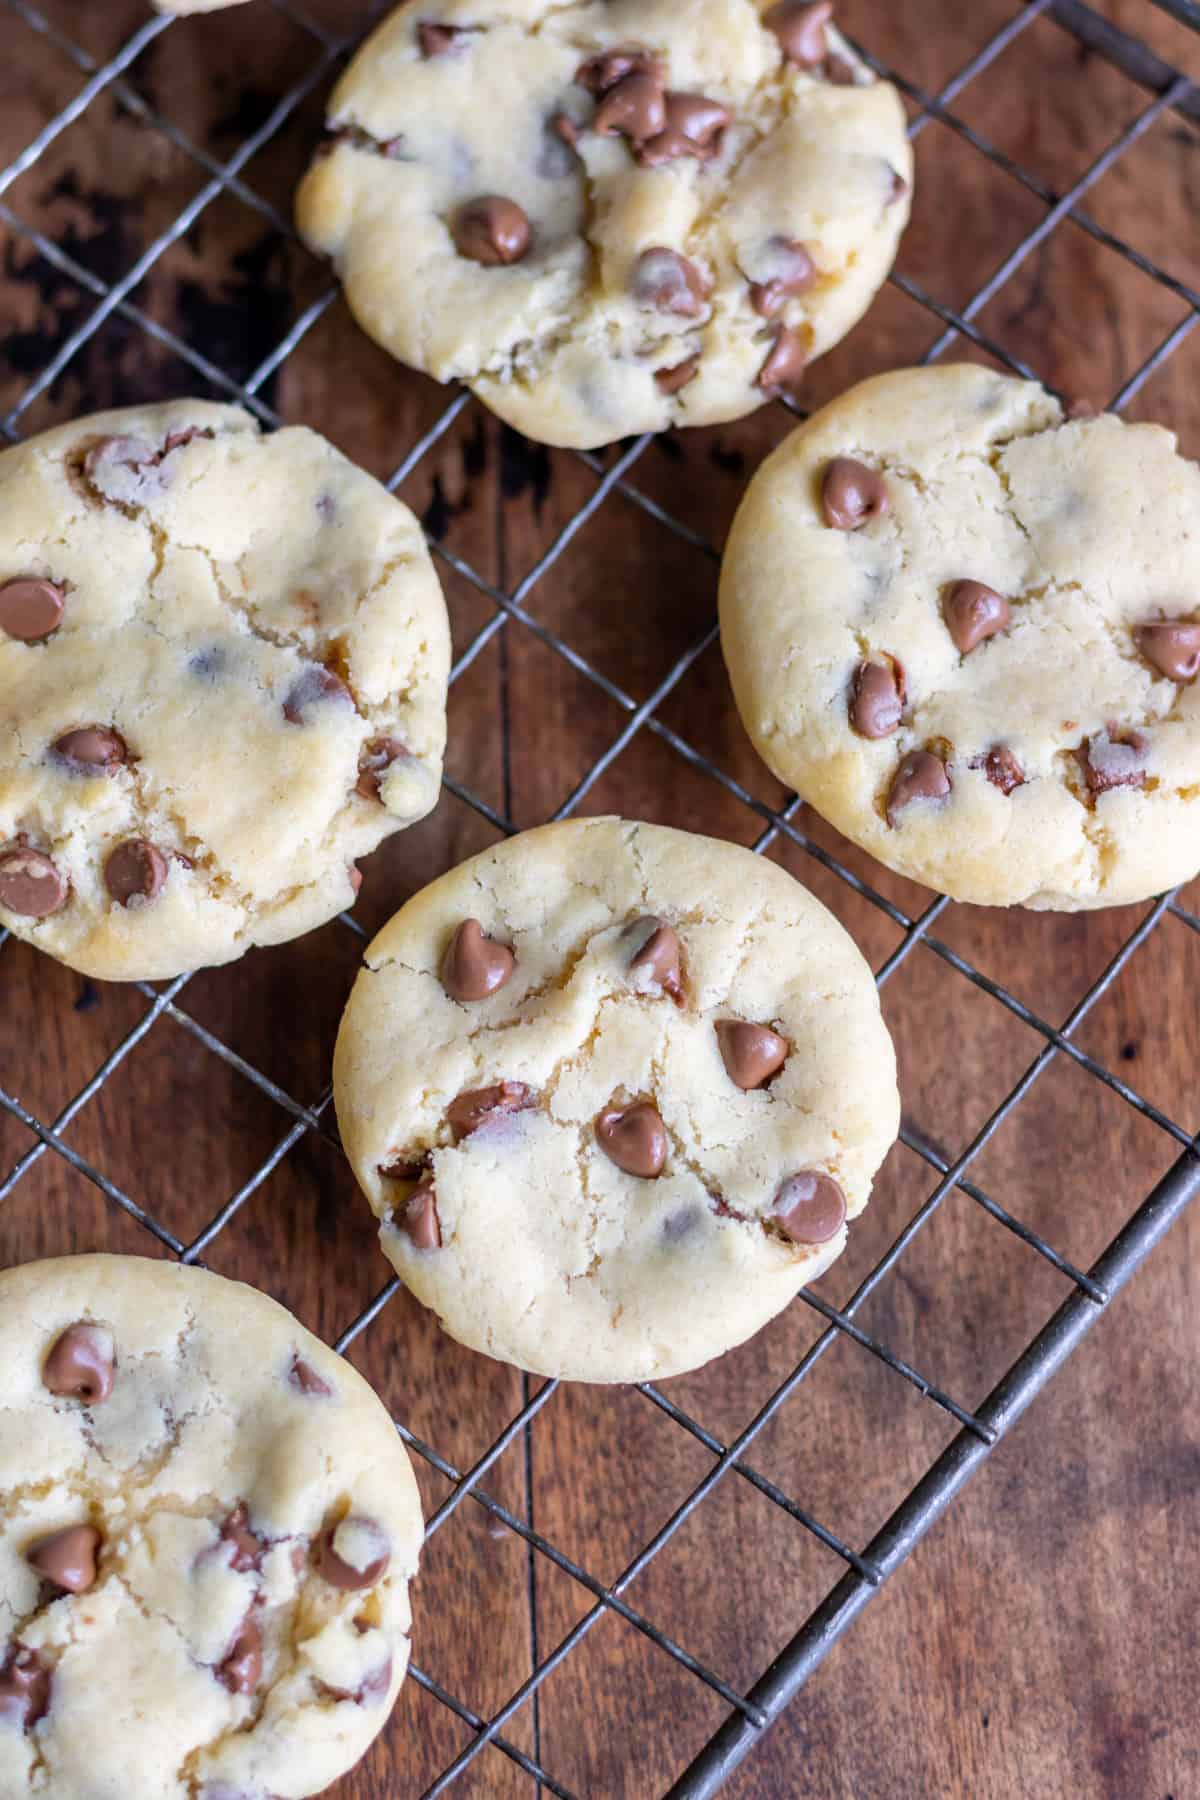 Chocolate chip condensed milk cookies cooling on a wire rack.